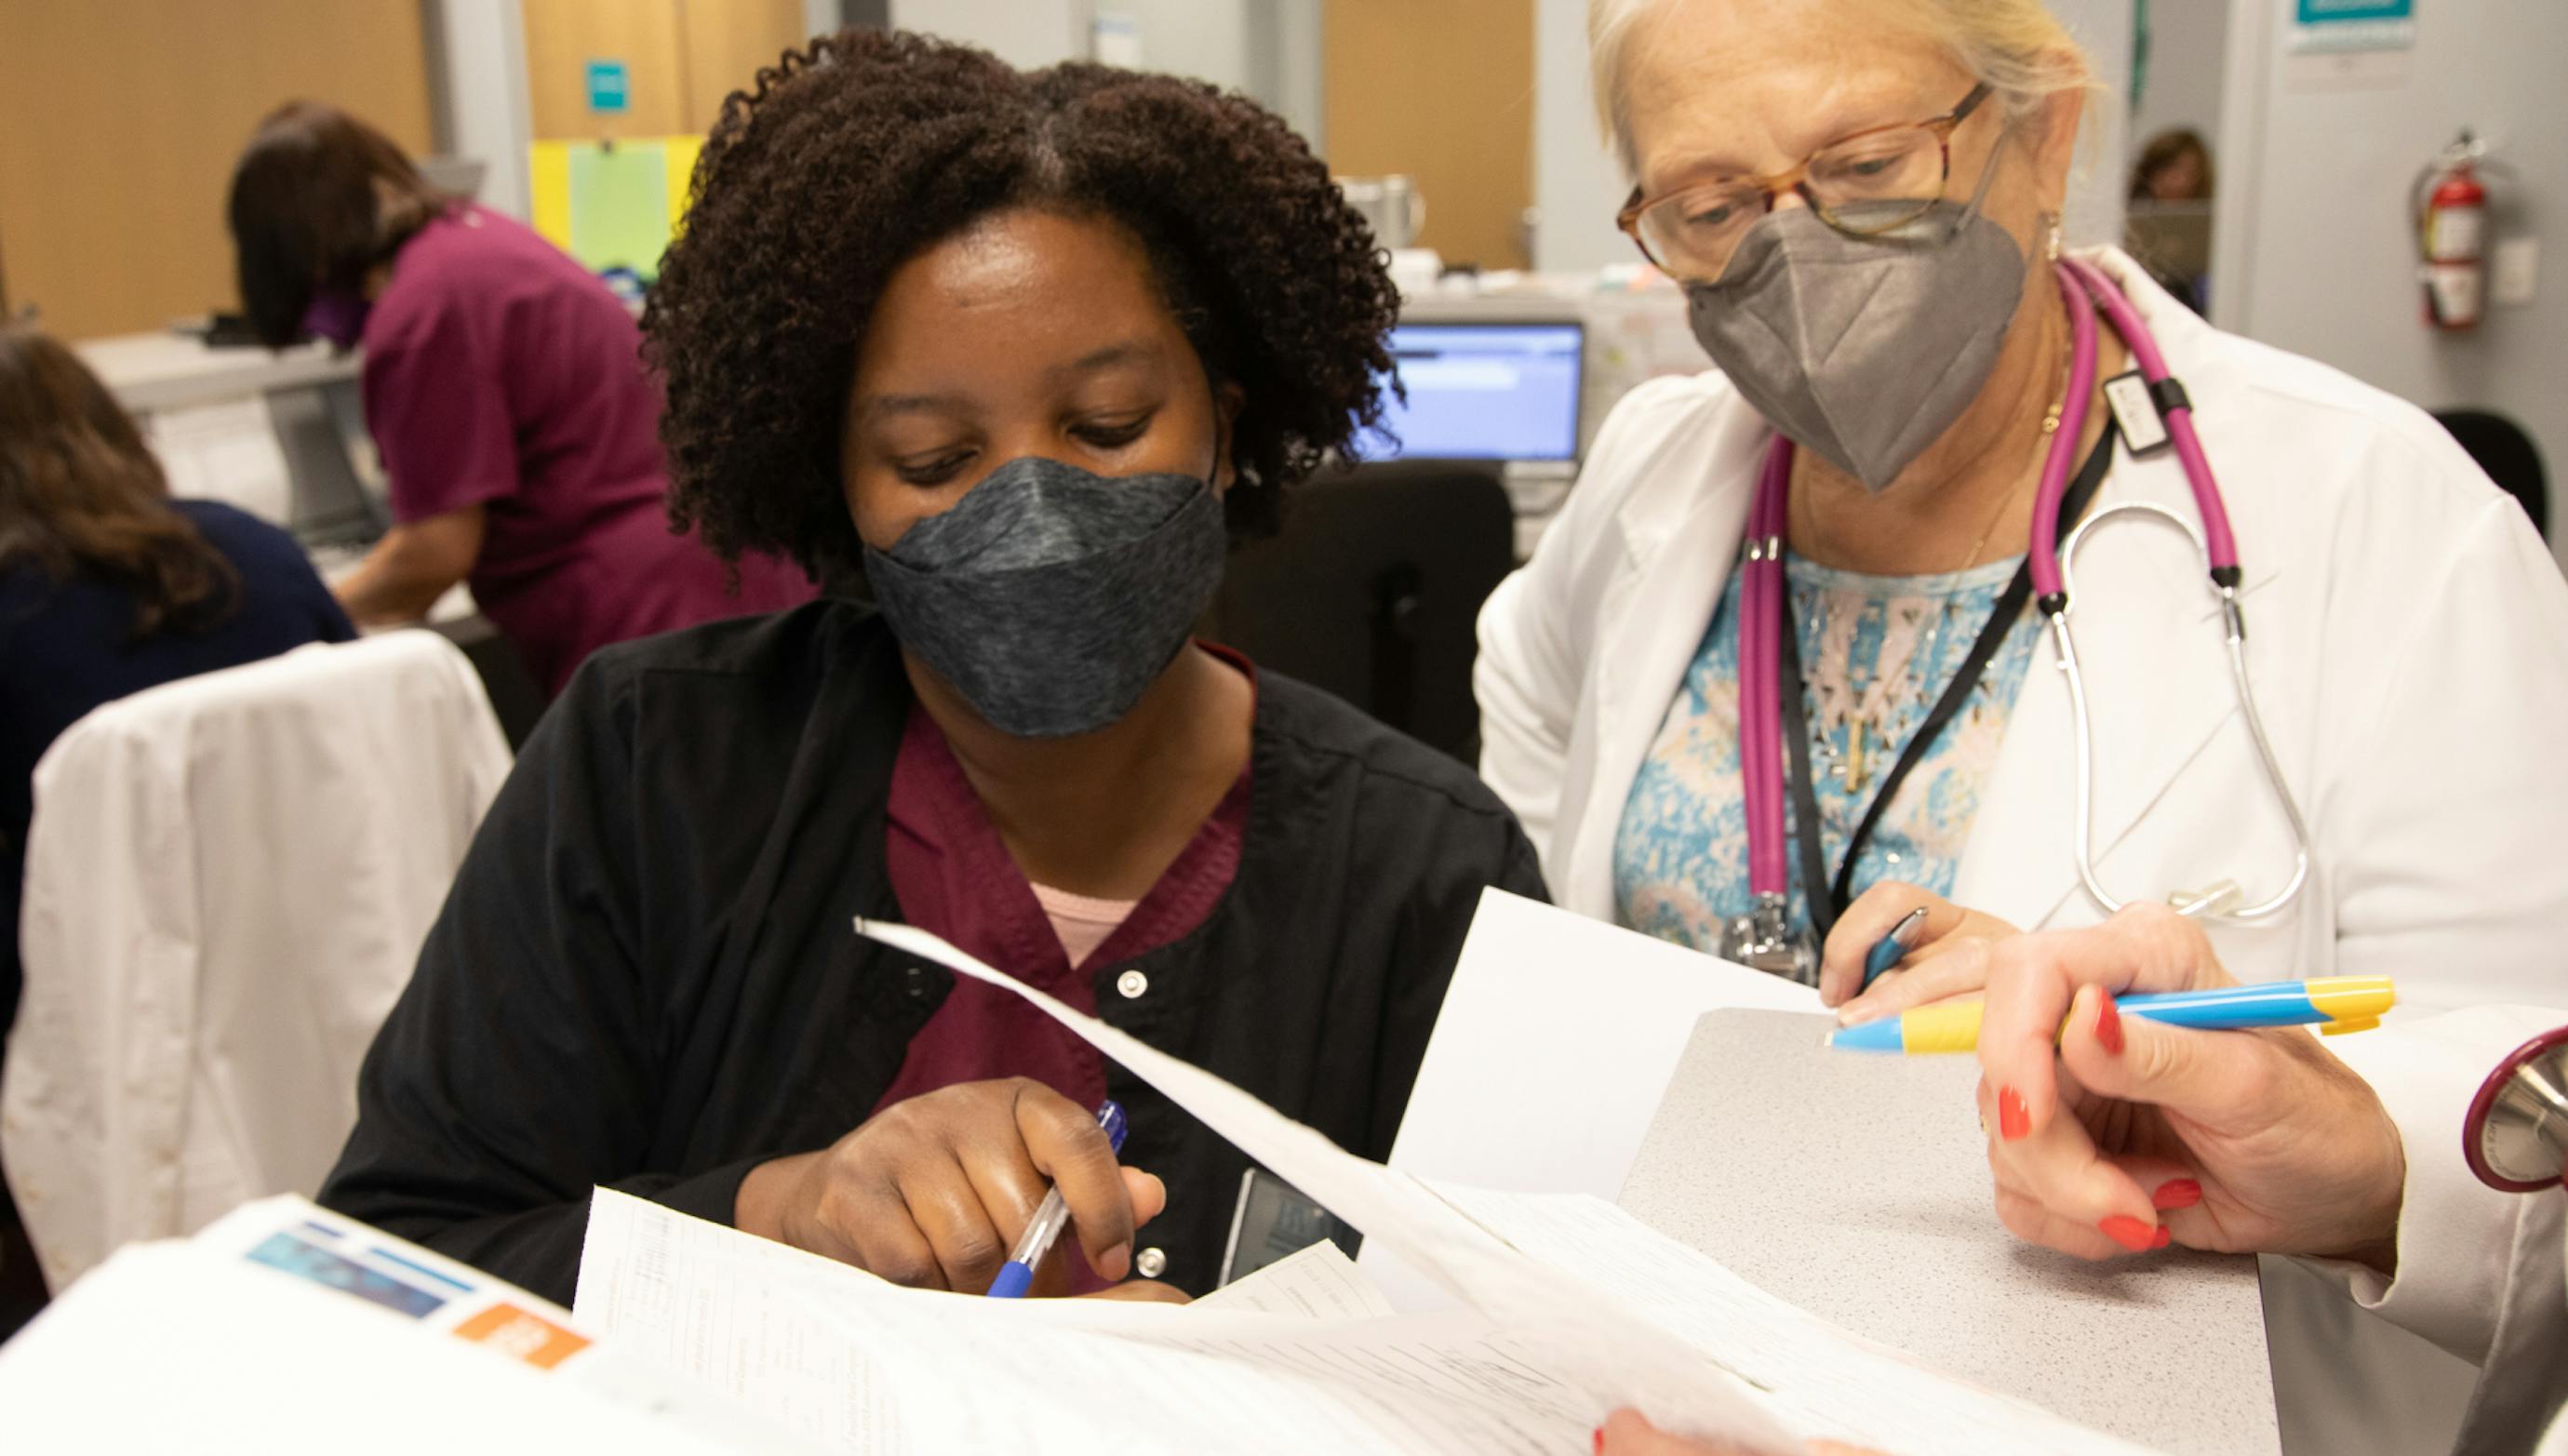 White physician and African American healthcare worker reviewing paperwork together